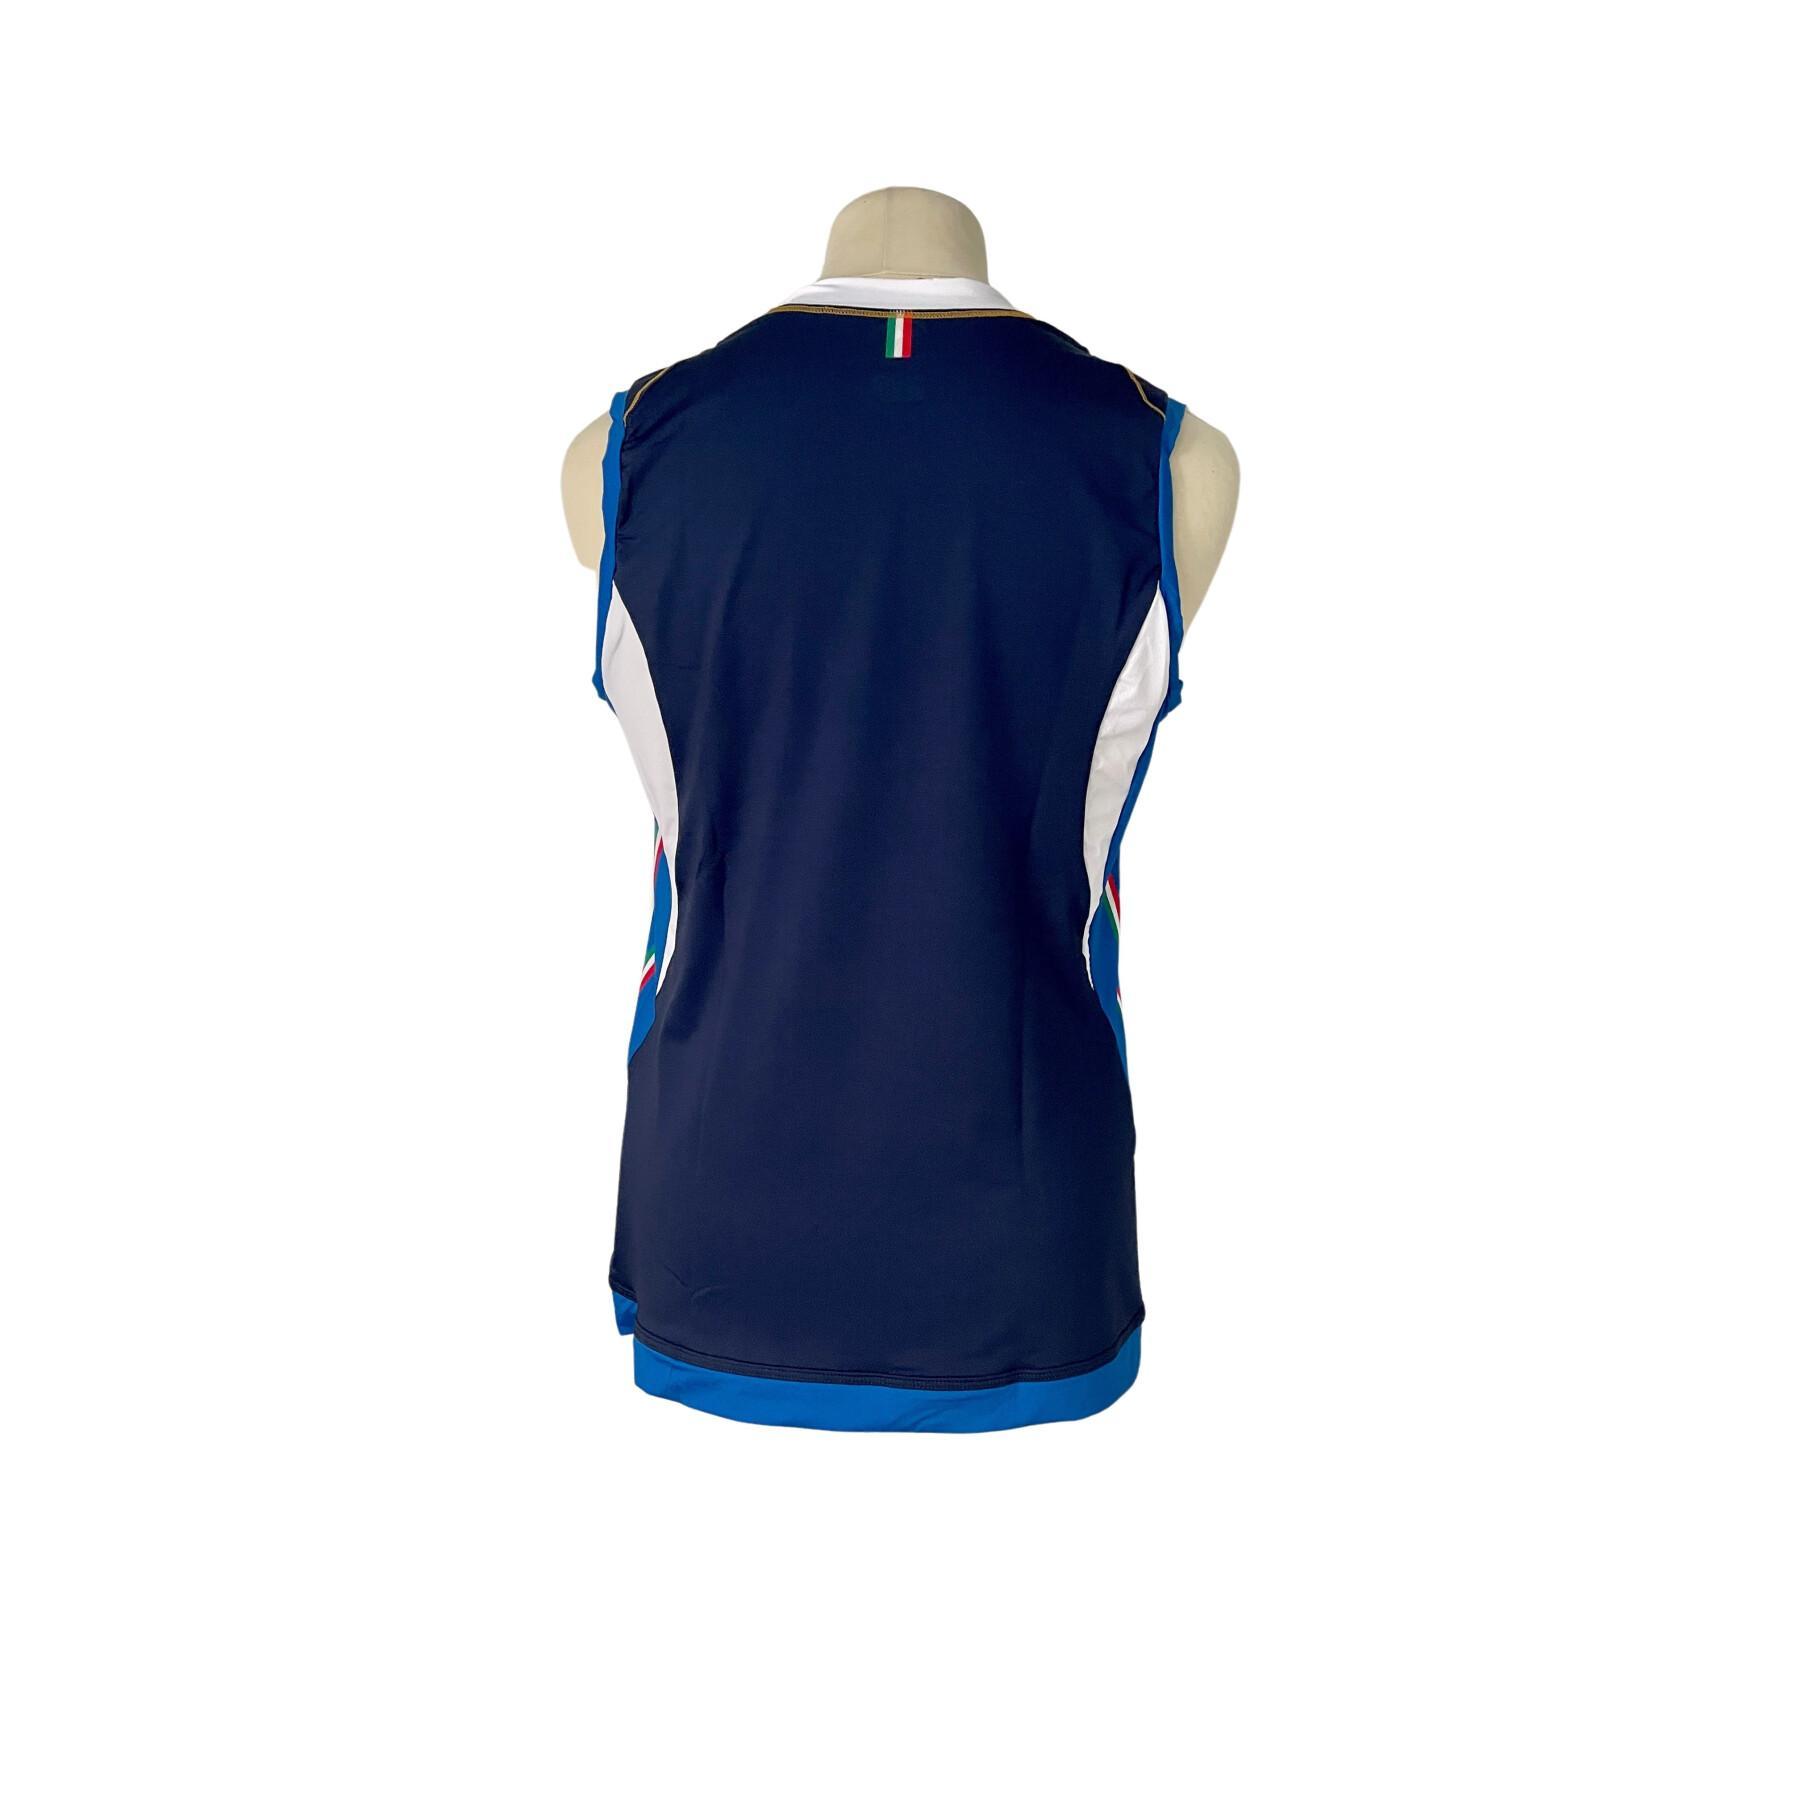 Drittes Trikot Italie Volley 2019/2020